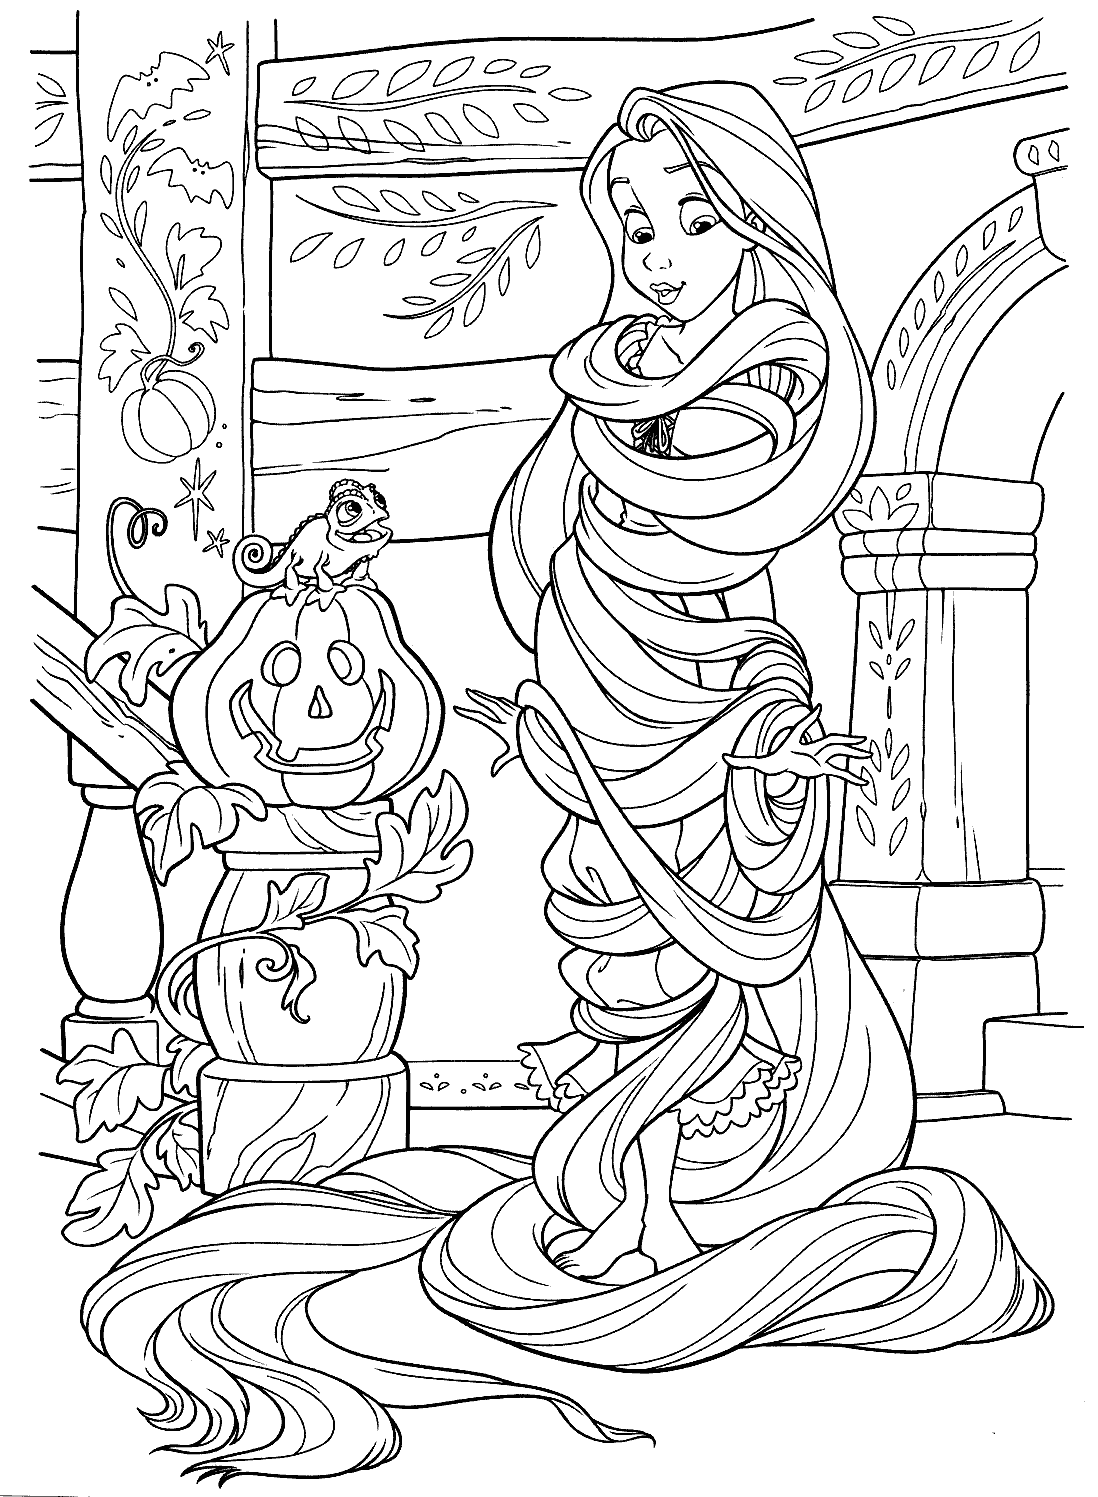 Rapunzel Coloring Page For Adults